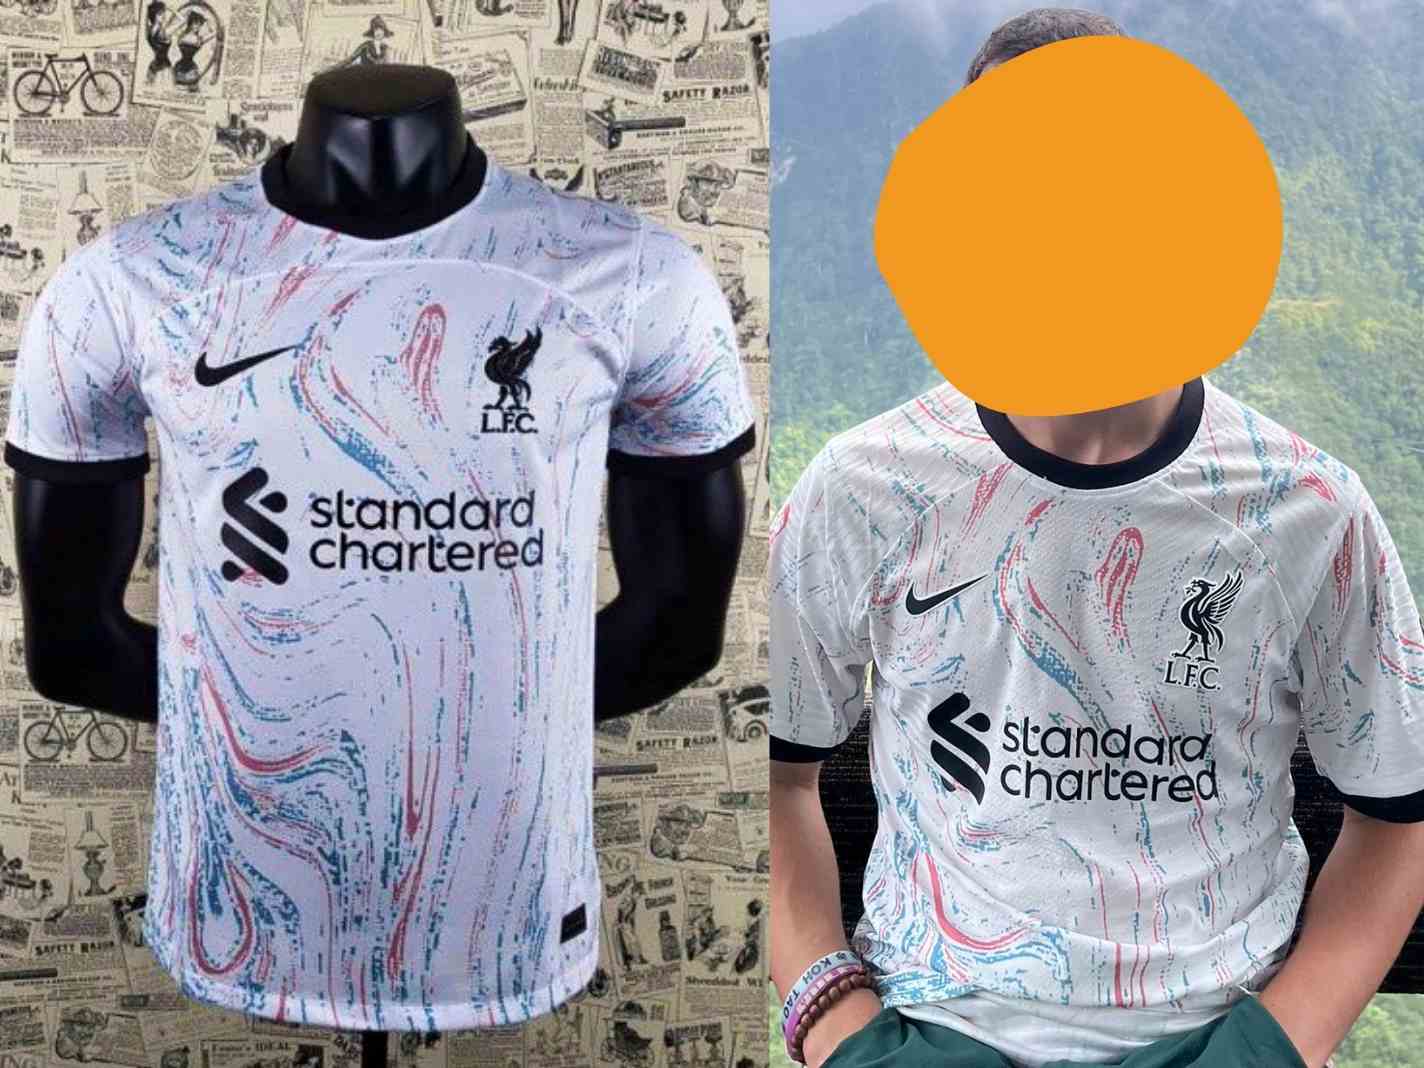 Liverpool Away Kit for 22/23 Season Available in Cambodia, But There’s a Catch